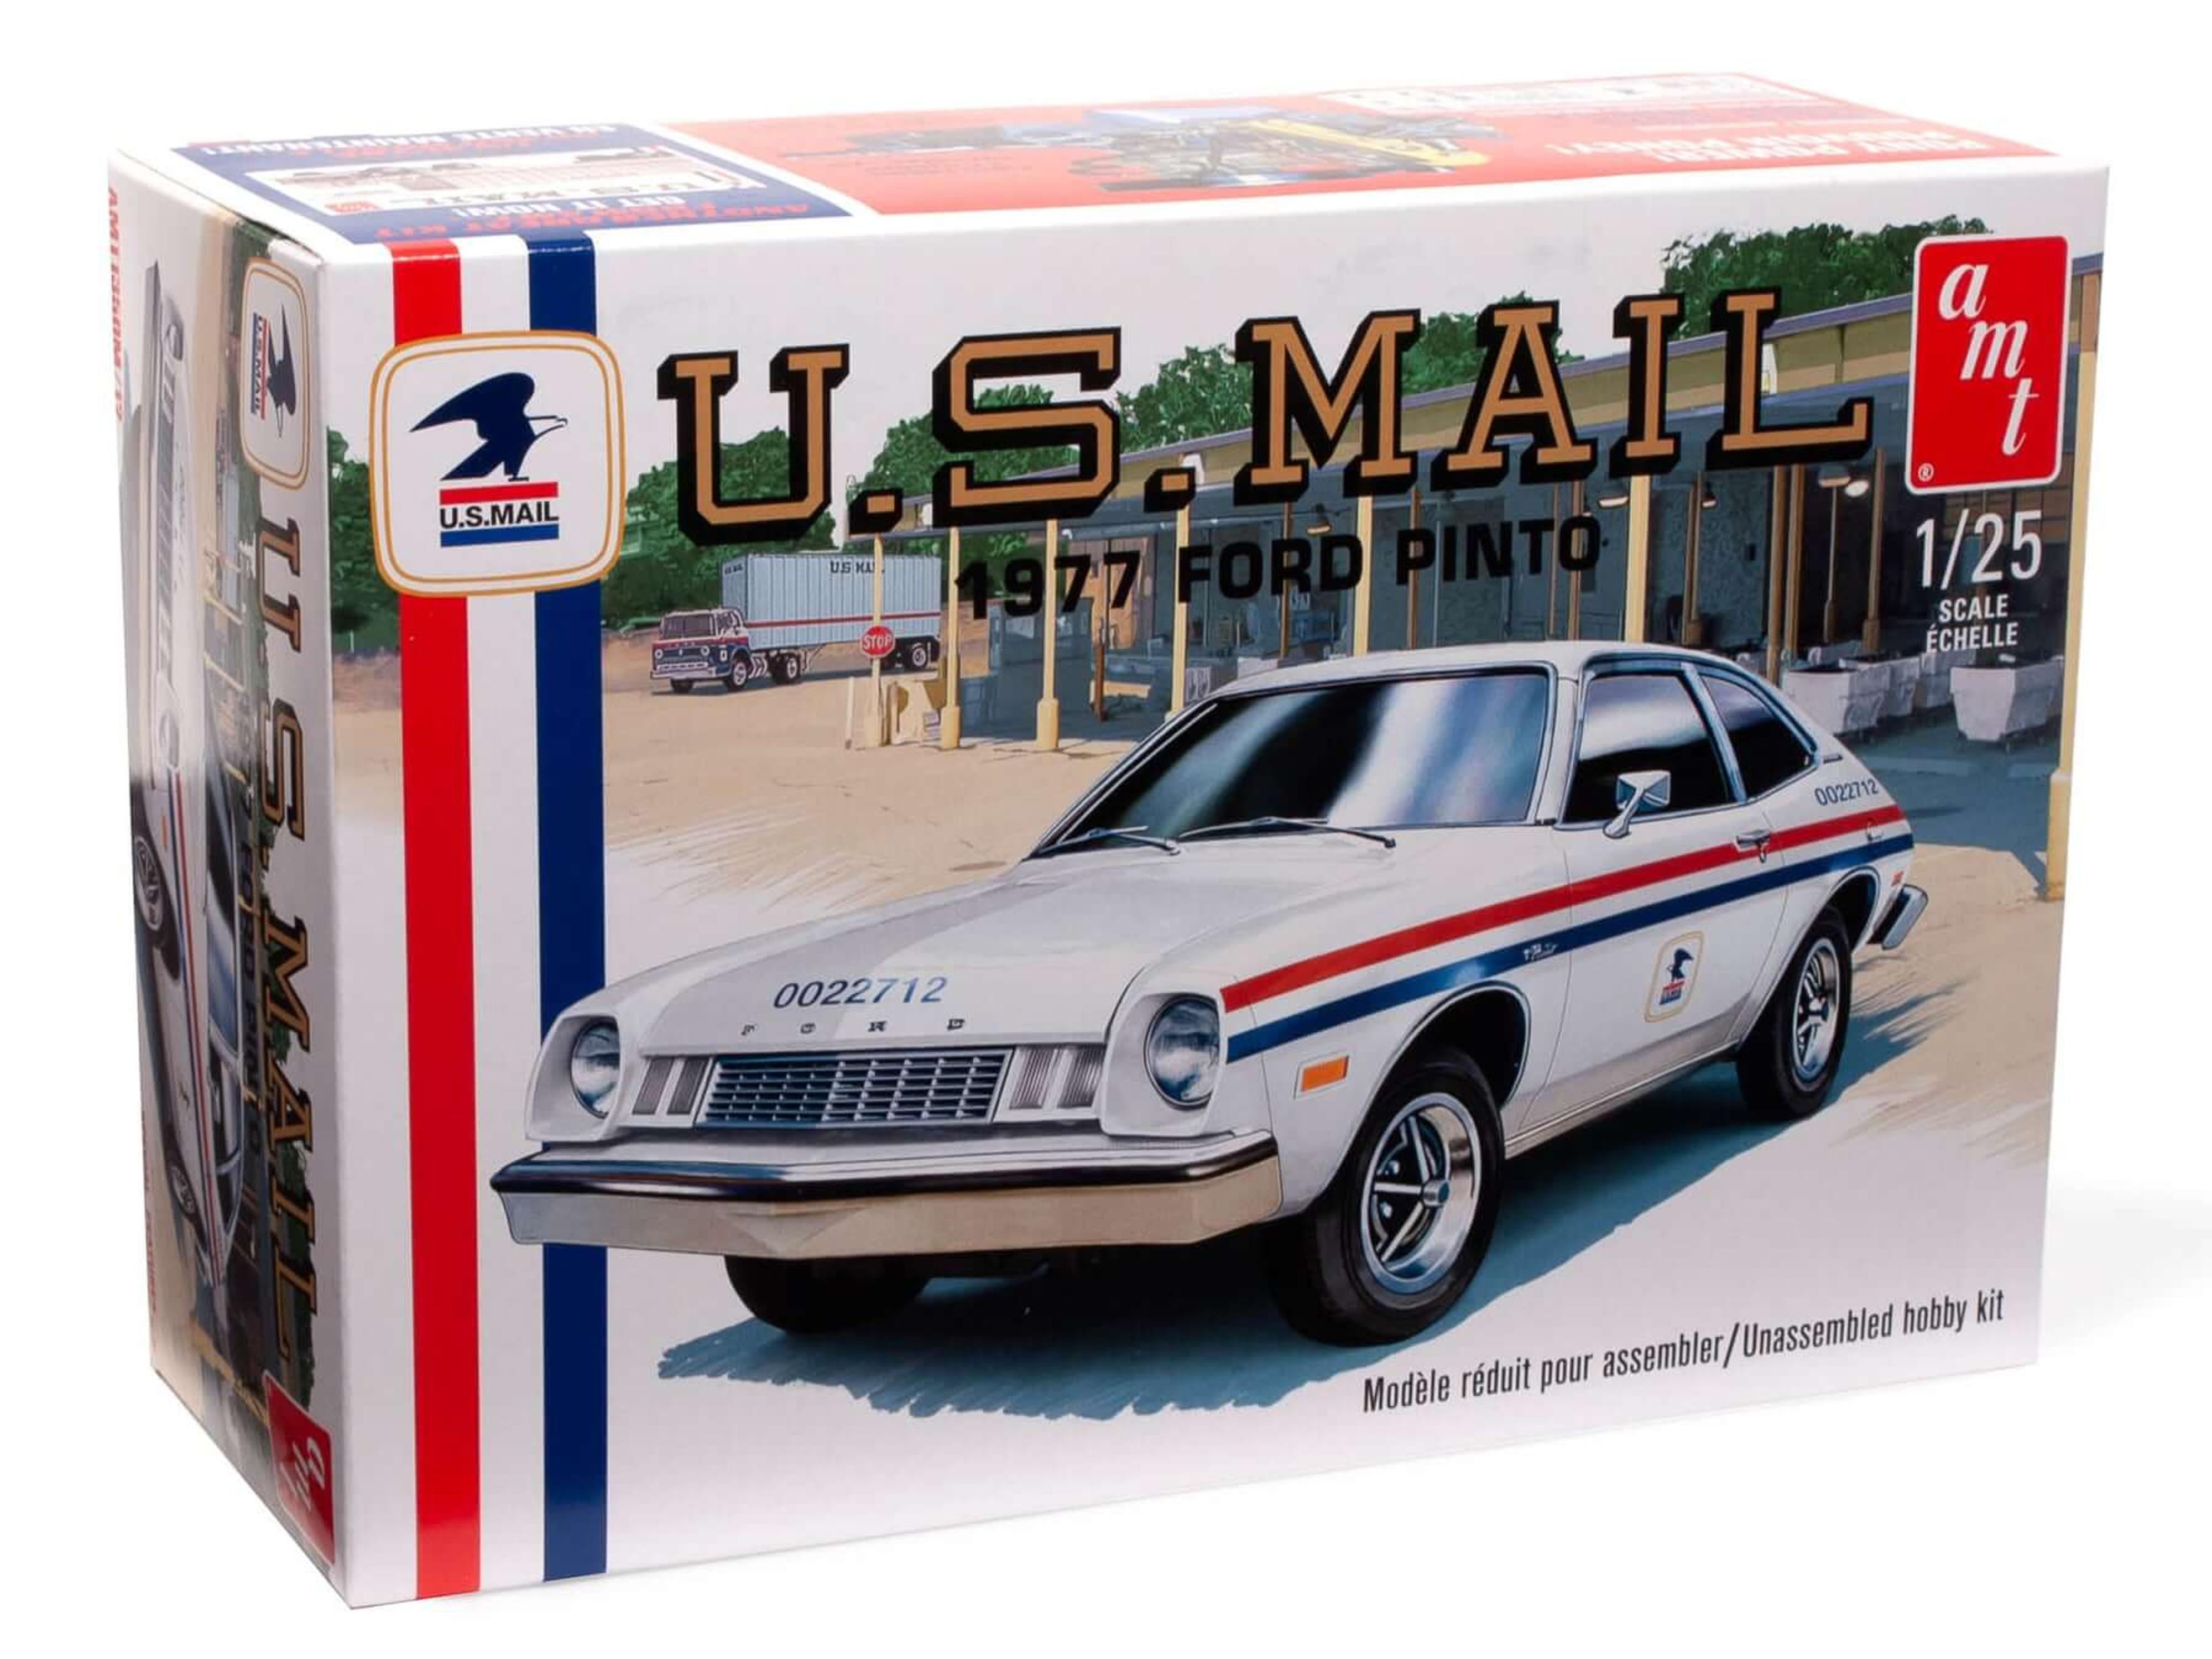 AMT 1/25 1977 Ford Pinto USPS Delivery Car Model Kit